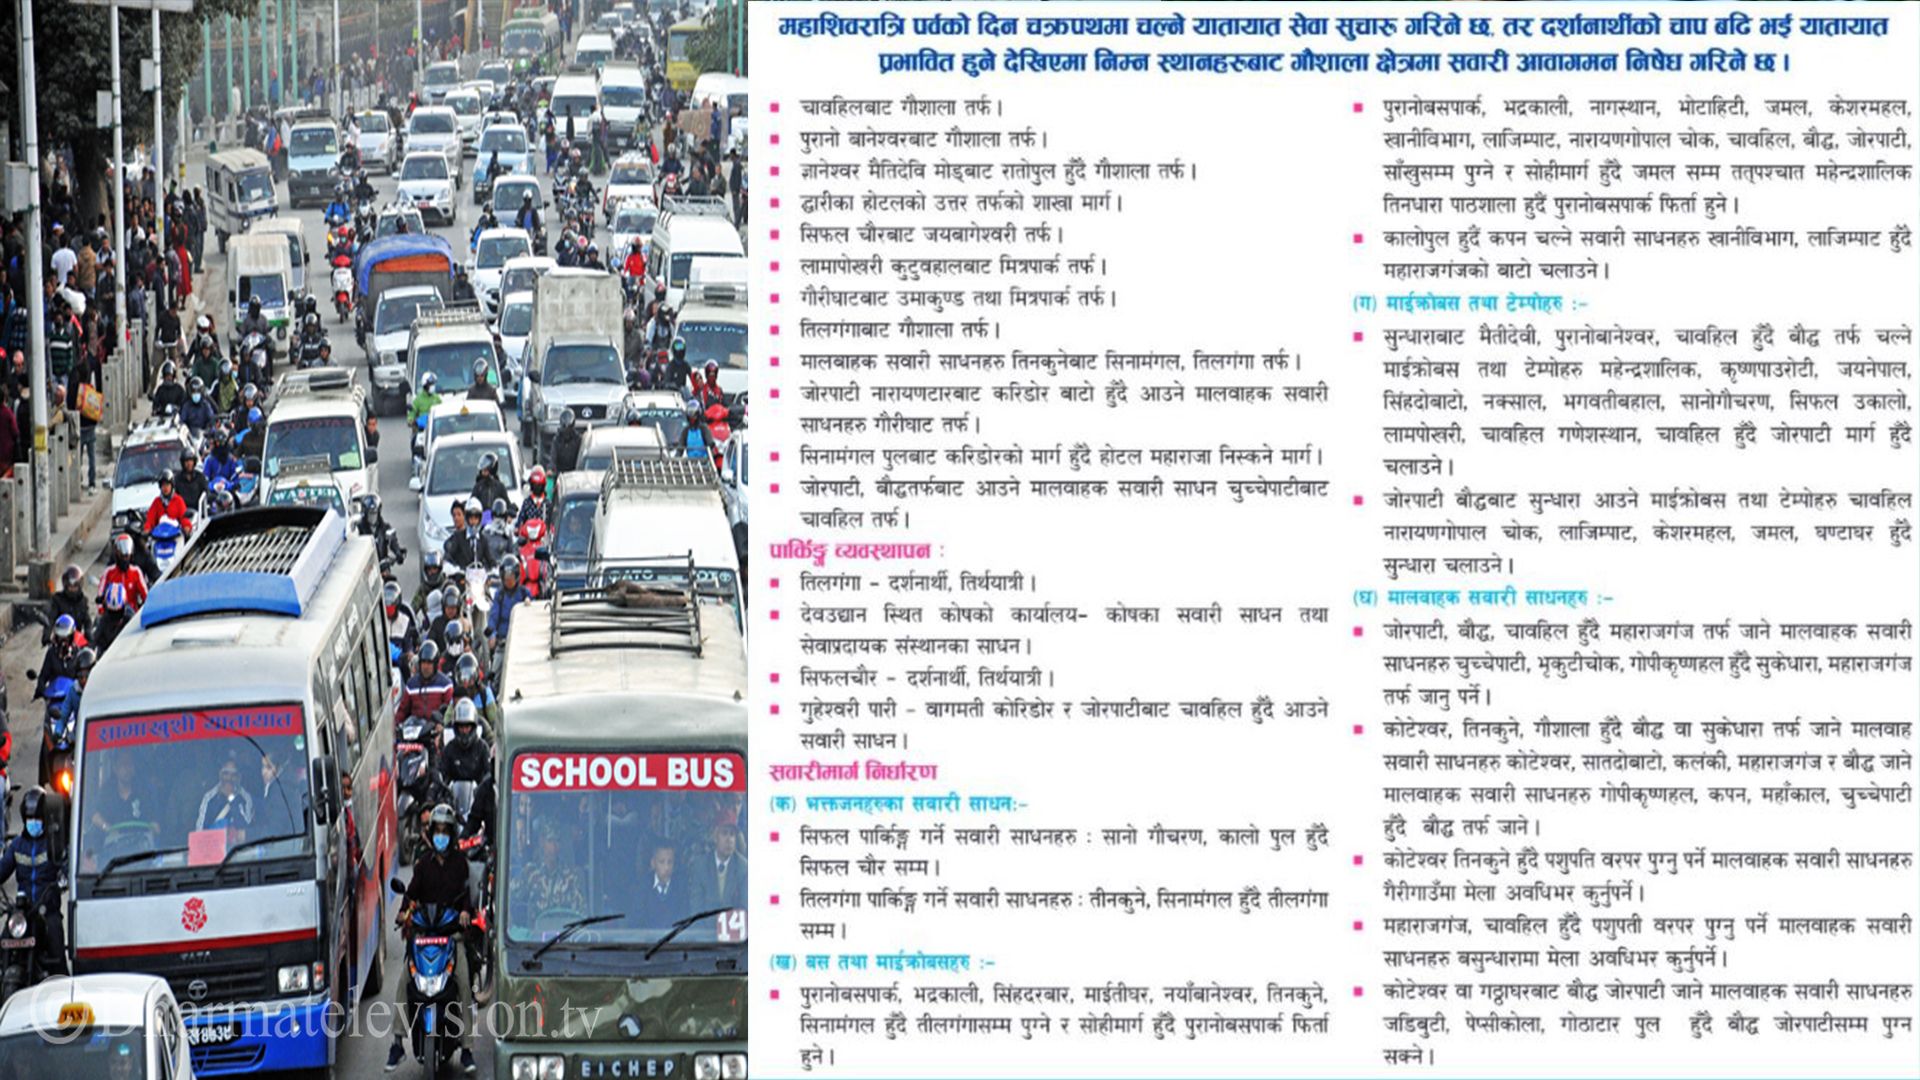 Vehicles not be allowed to drive in these areas of Kathmandu tomorrow